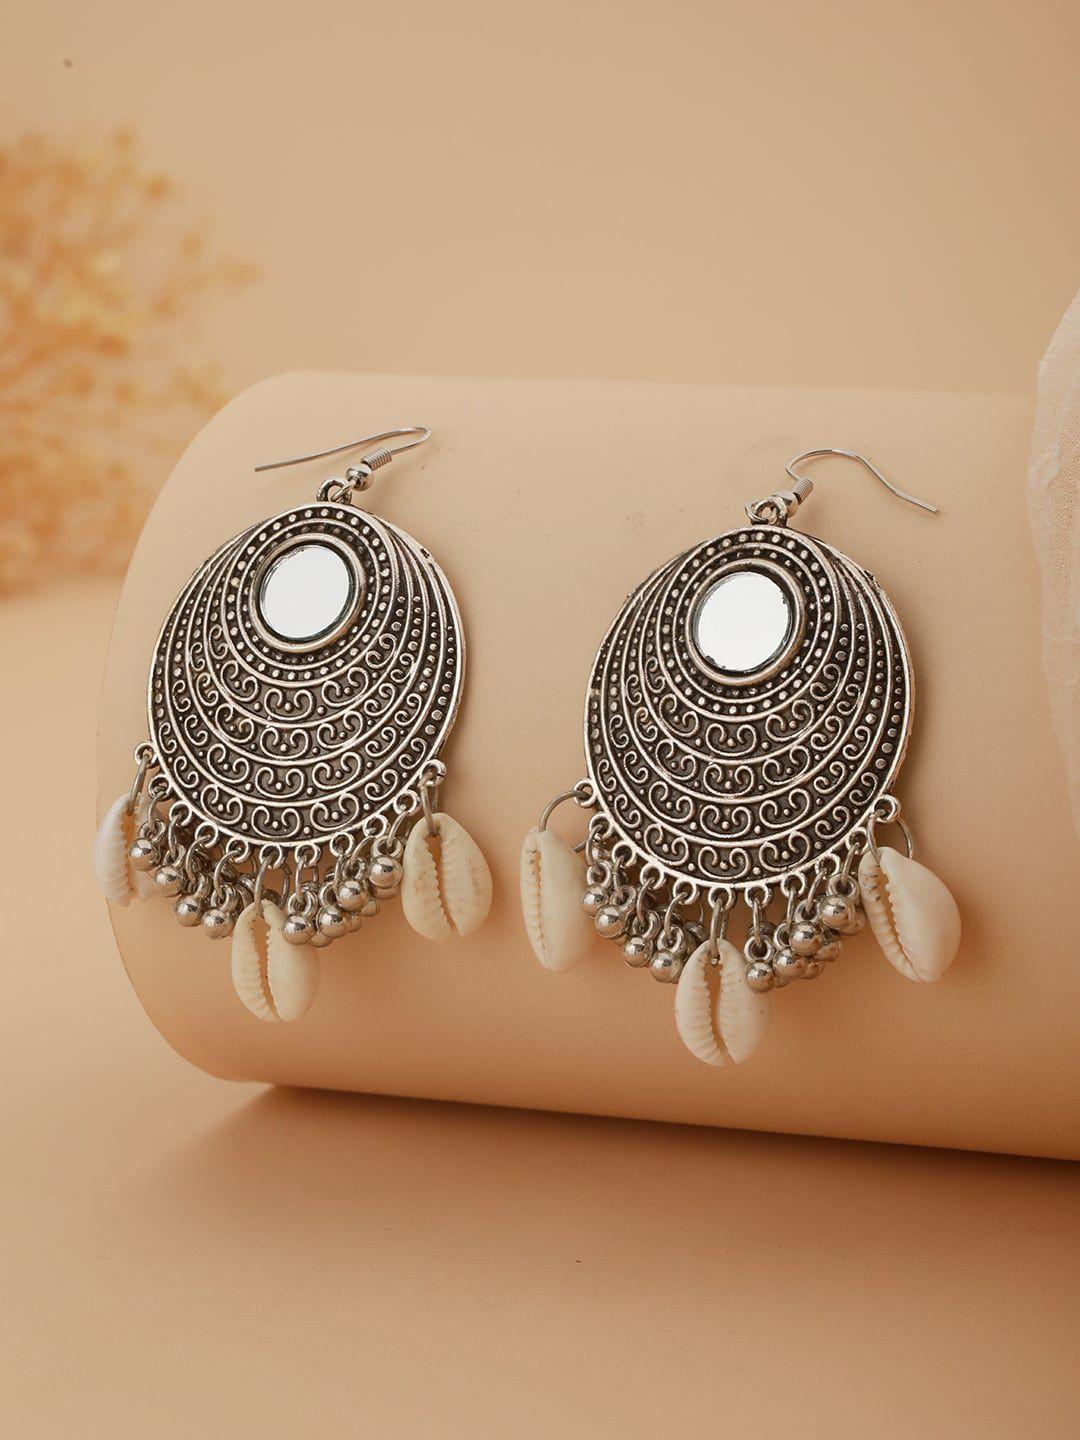 aadvik designs silver-toned contemporary studs earrings